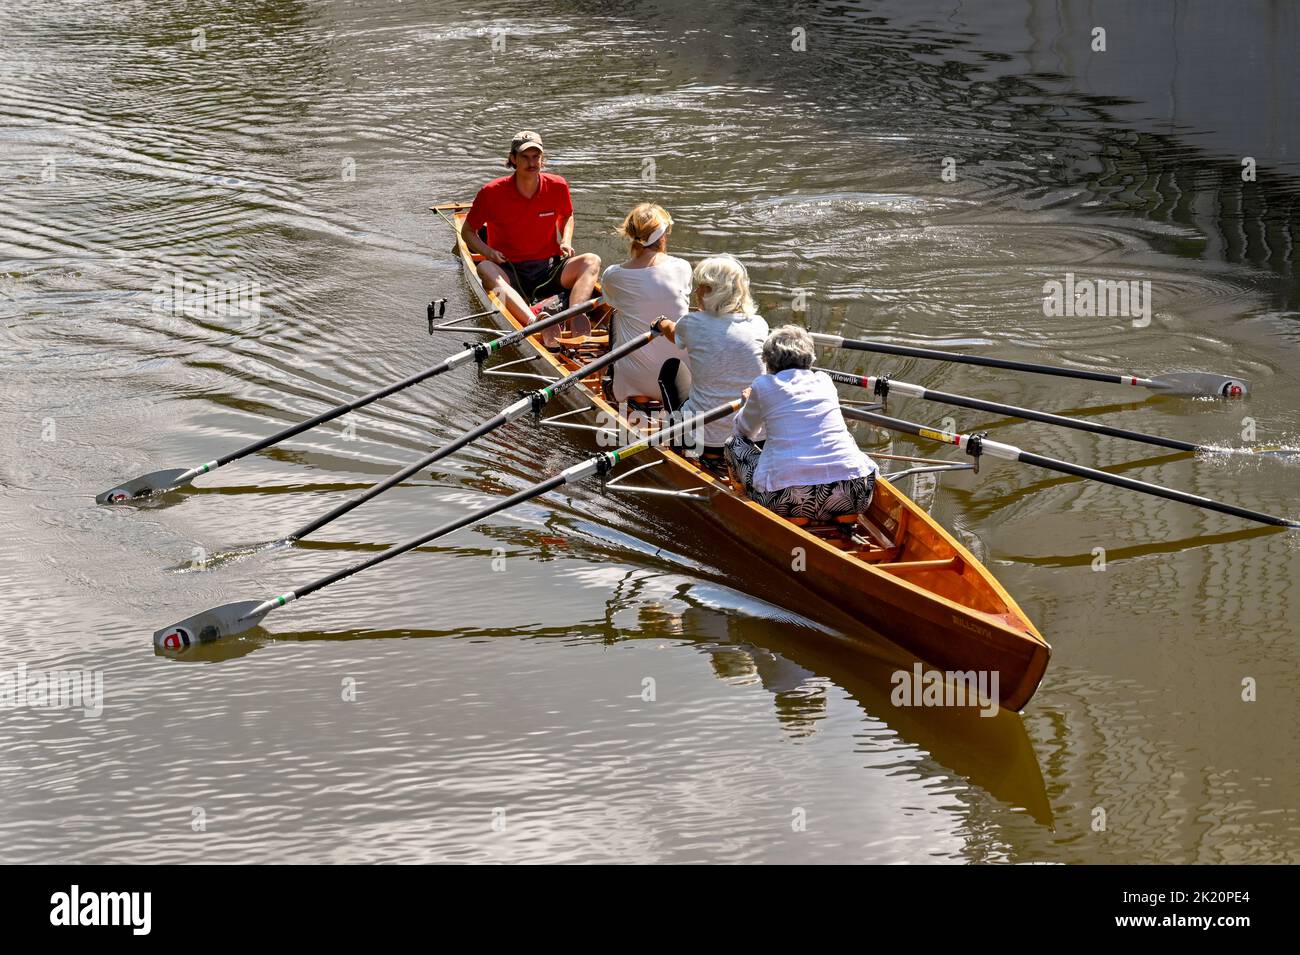 Amsterdam, Netherlands - August 2022: Rowing boat with mature women exercising on a canal in the city centre Stock Photo